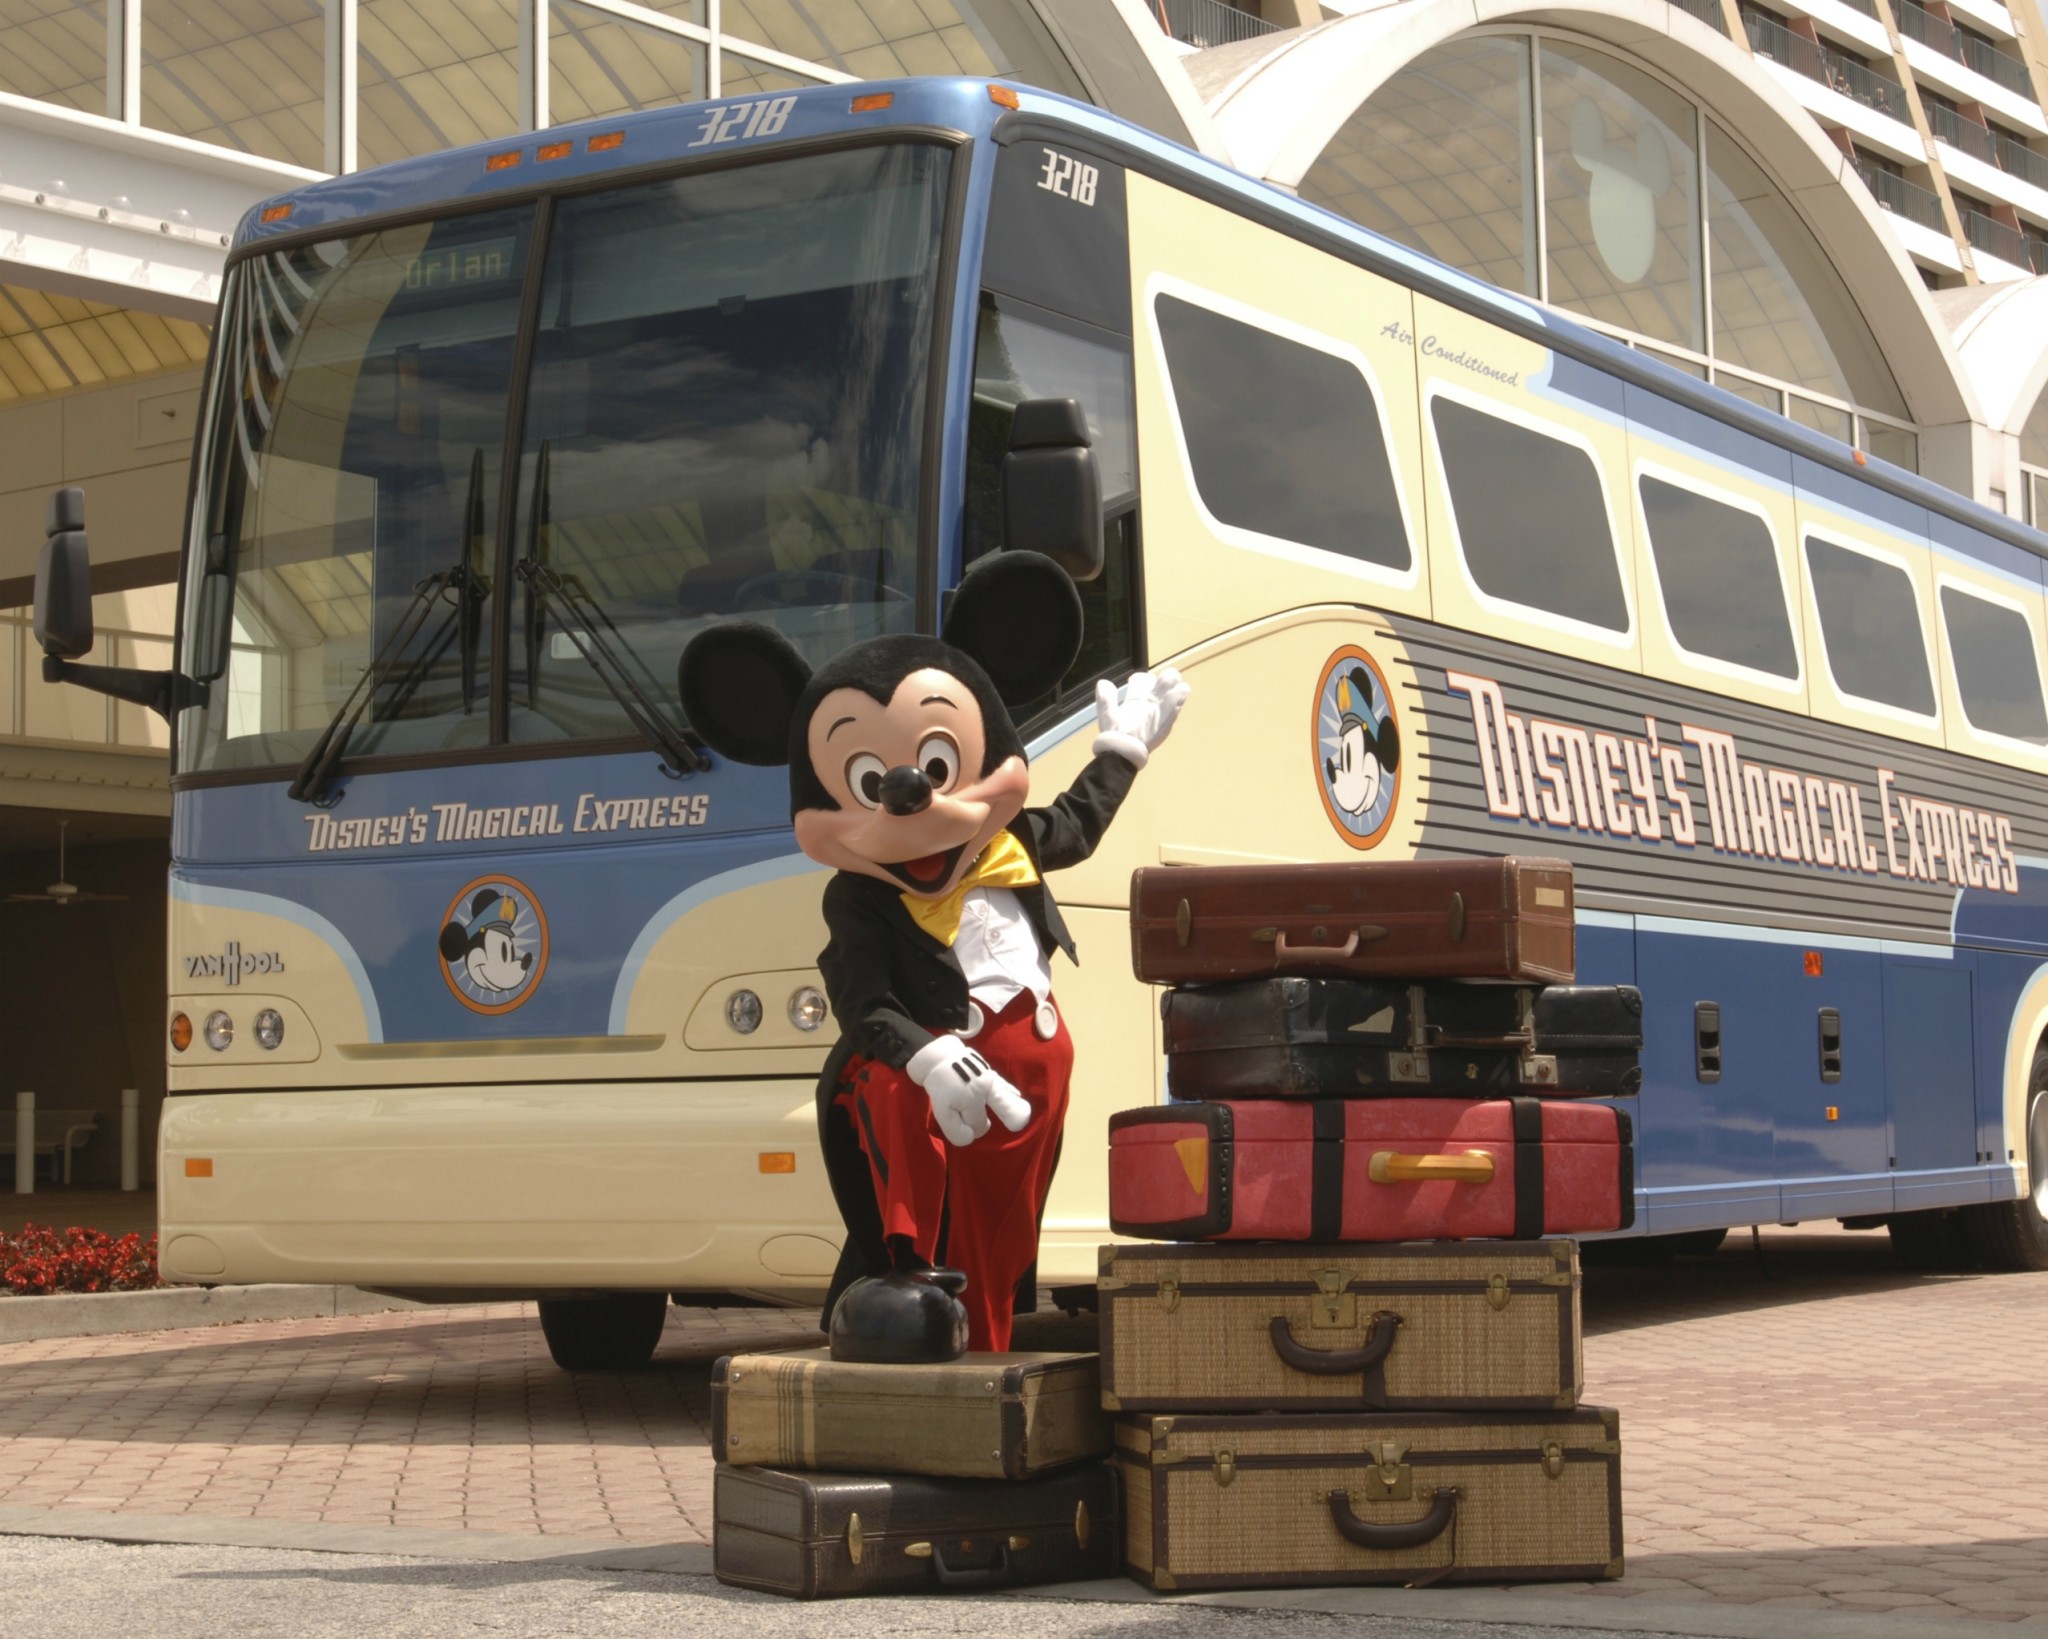 Disney Will No Longer Offer Disney’s Magical Express In 2022